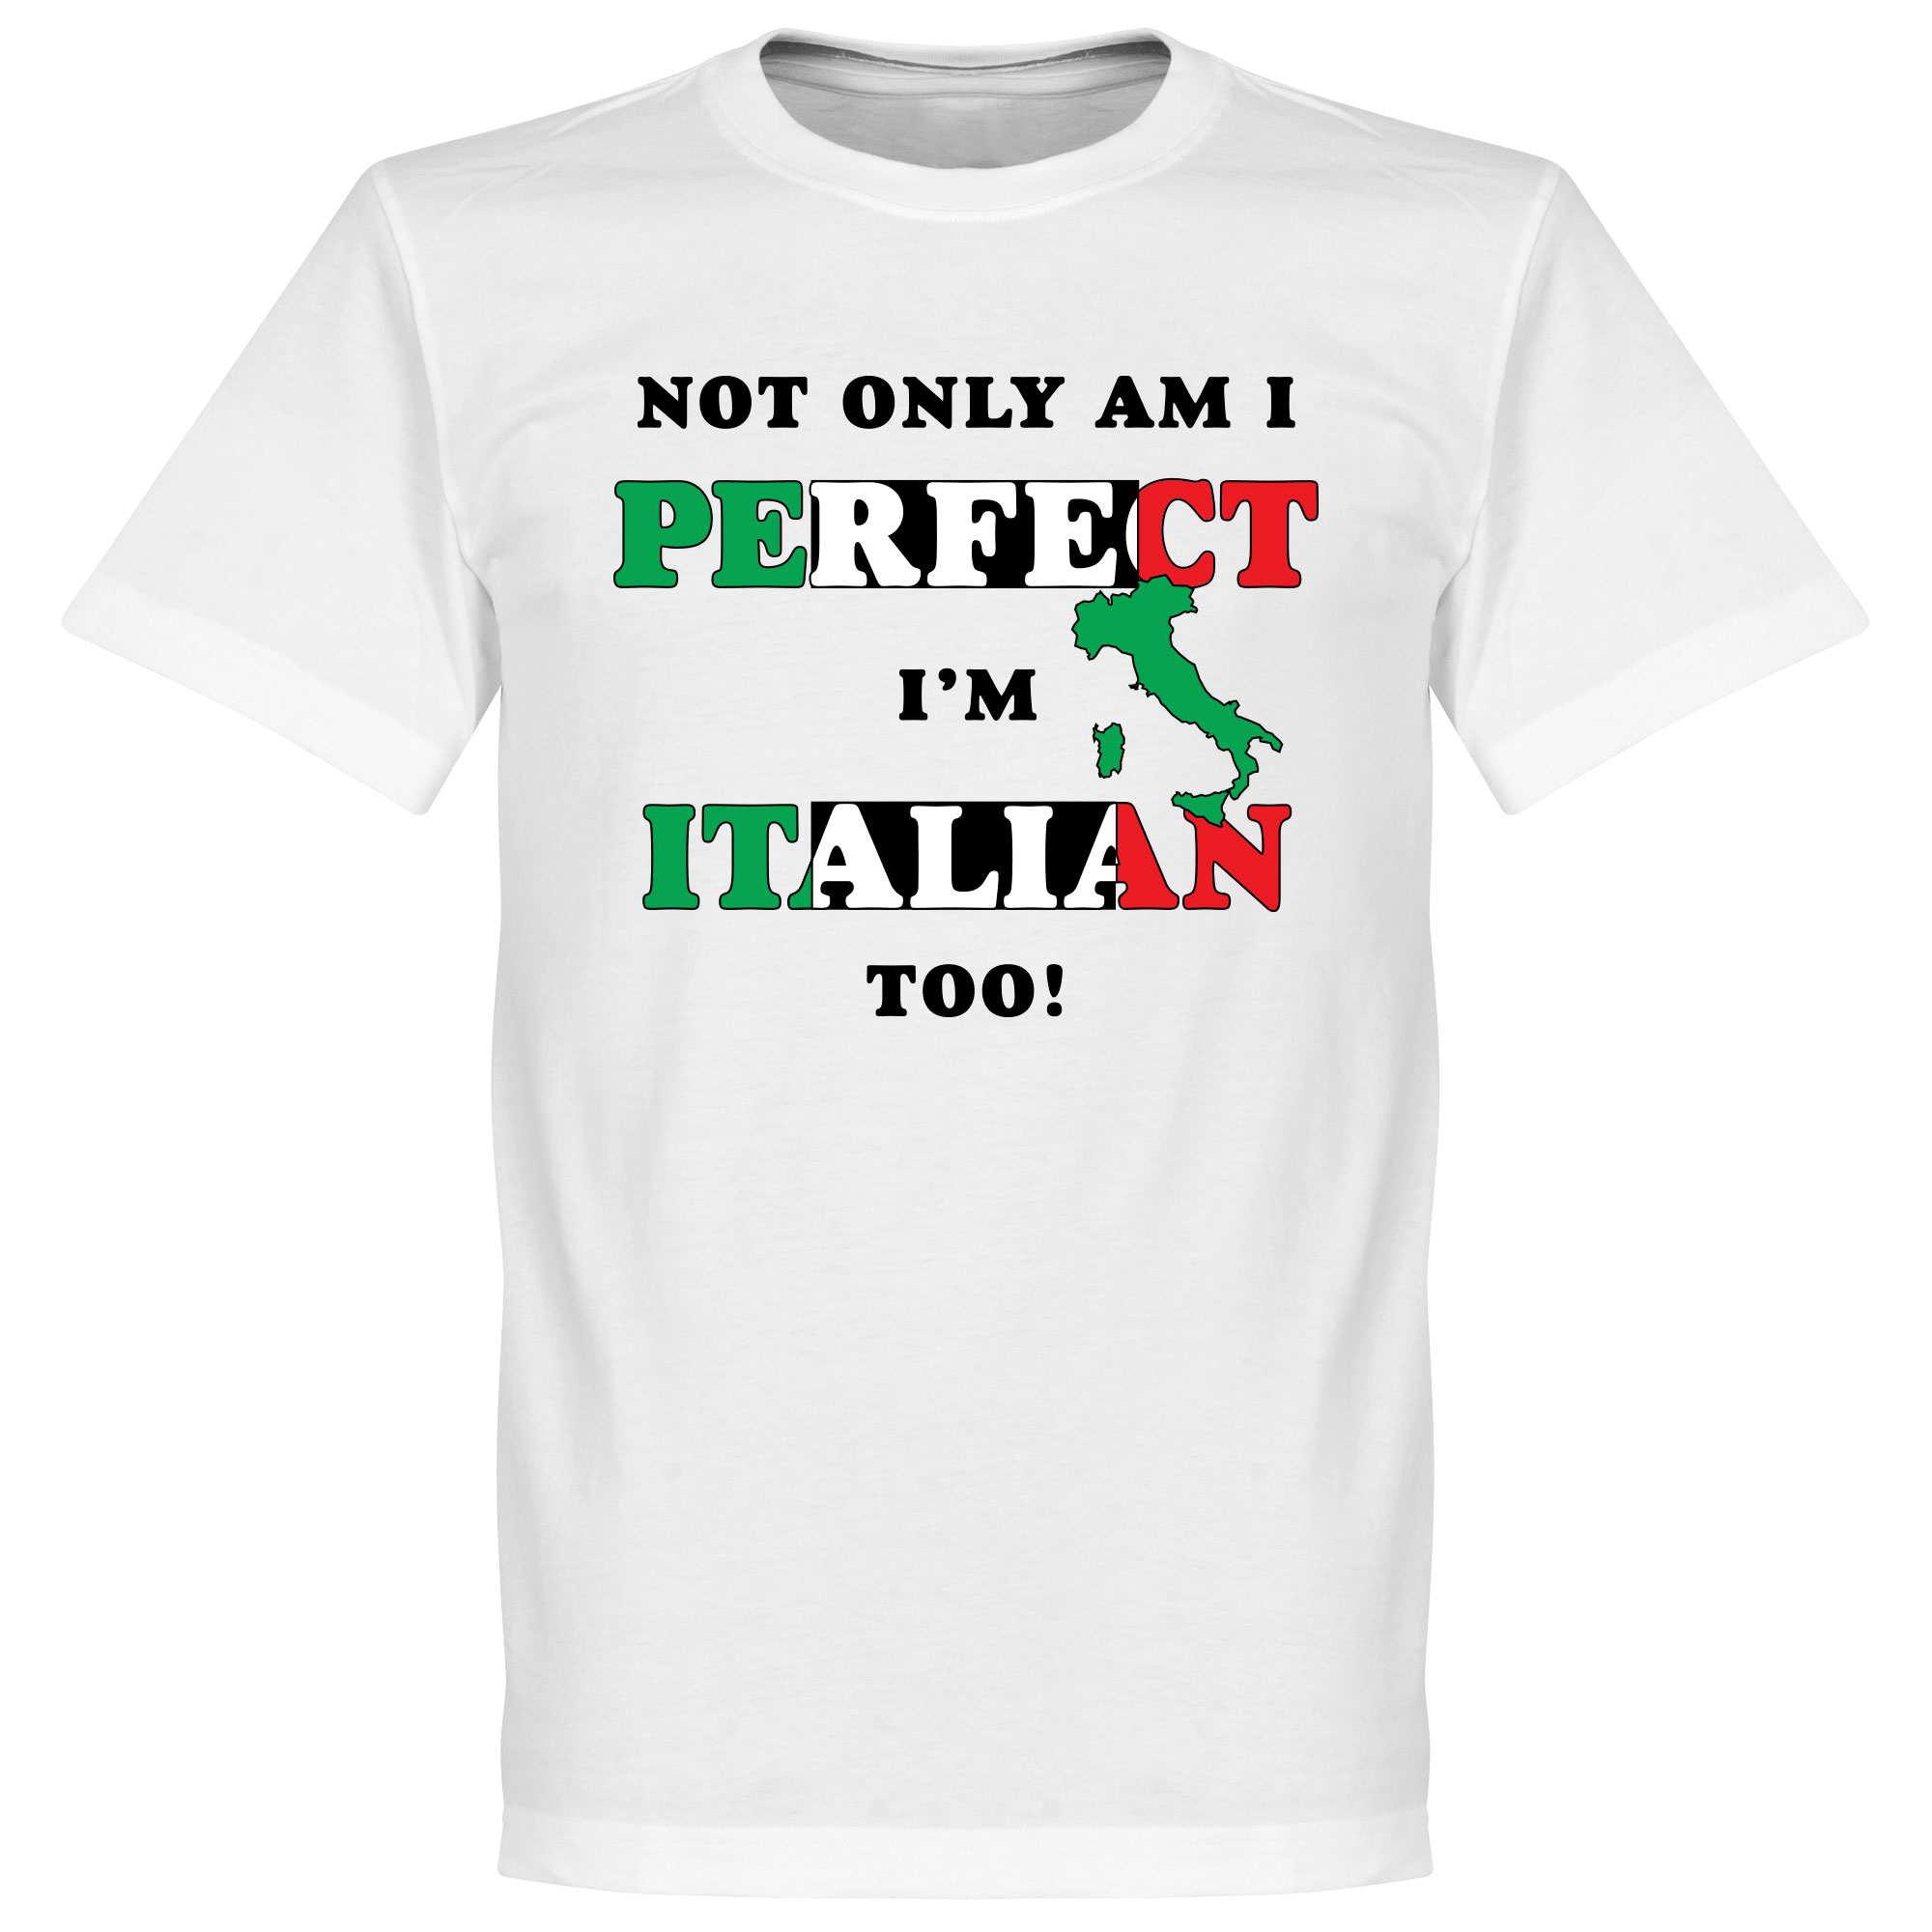 Not Only Am I Perfect, I'm Italian Too! T-Shirt M